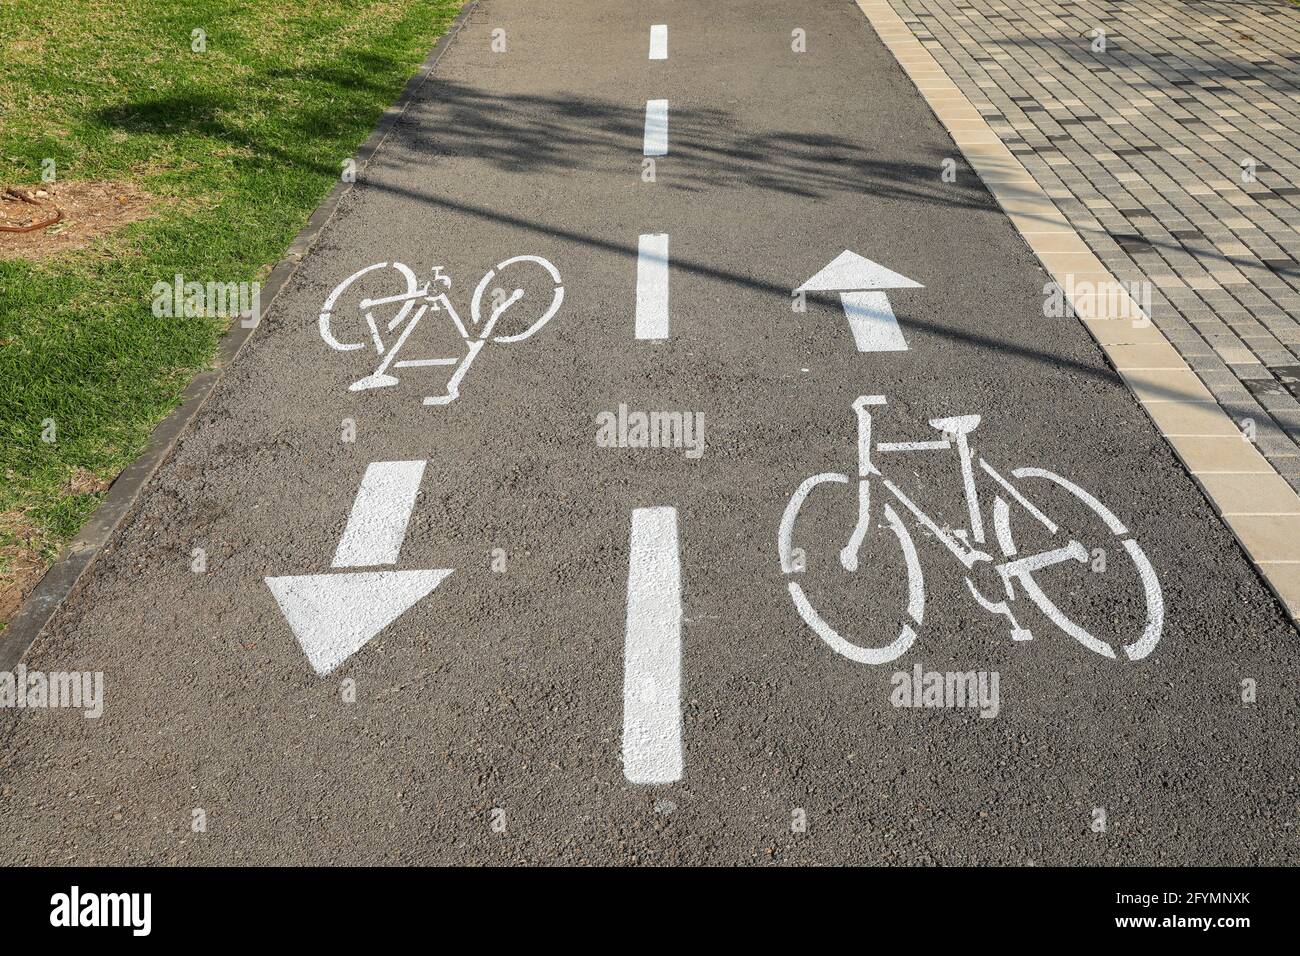 Bicycle path. Bicycle lane sign on a road. Stock Photo